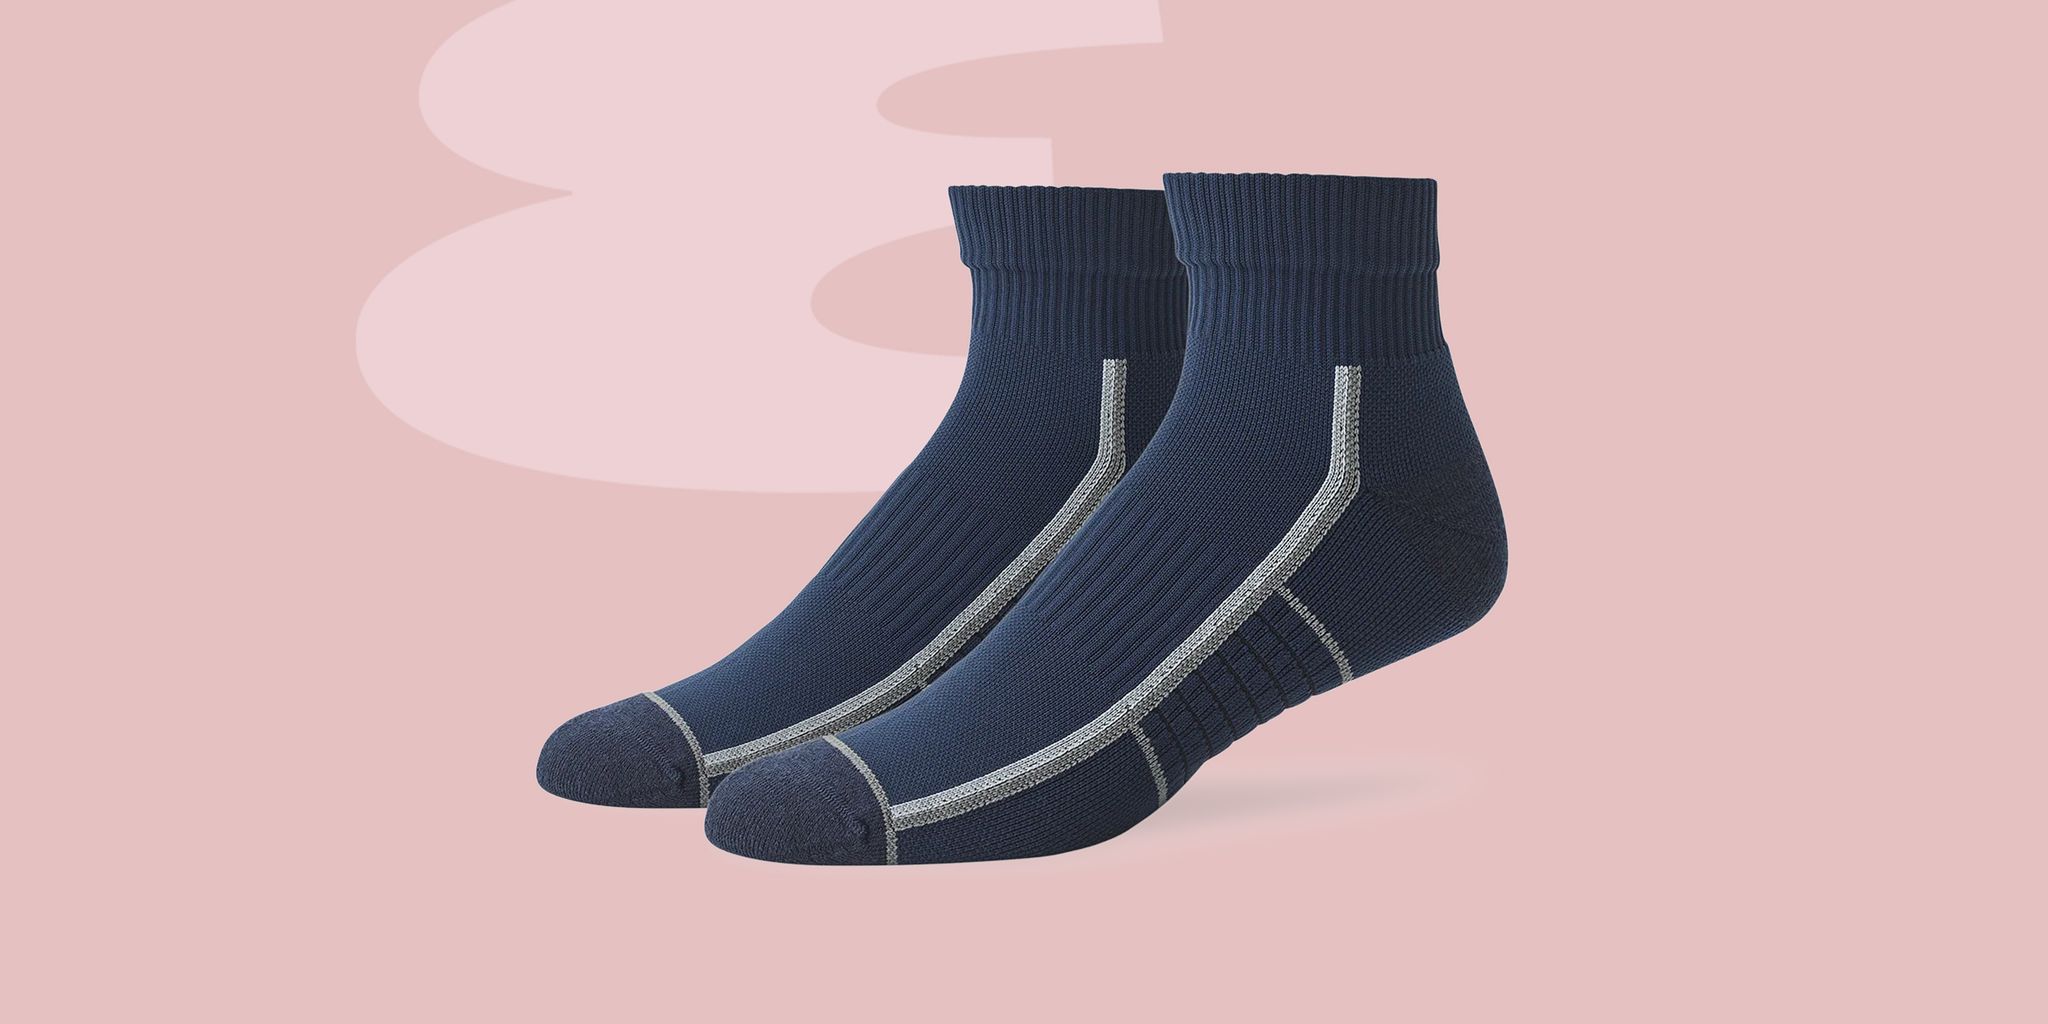 The 13 Best Cushioned Socks for Extra Comfort